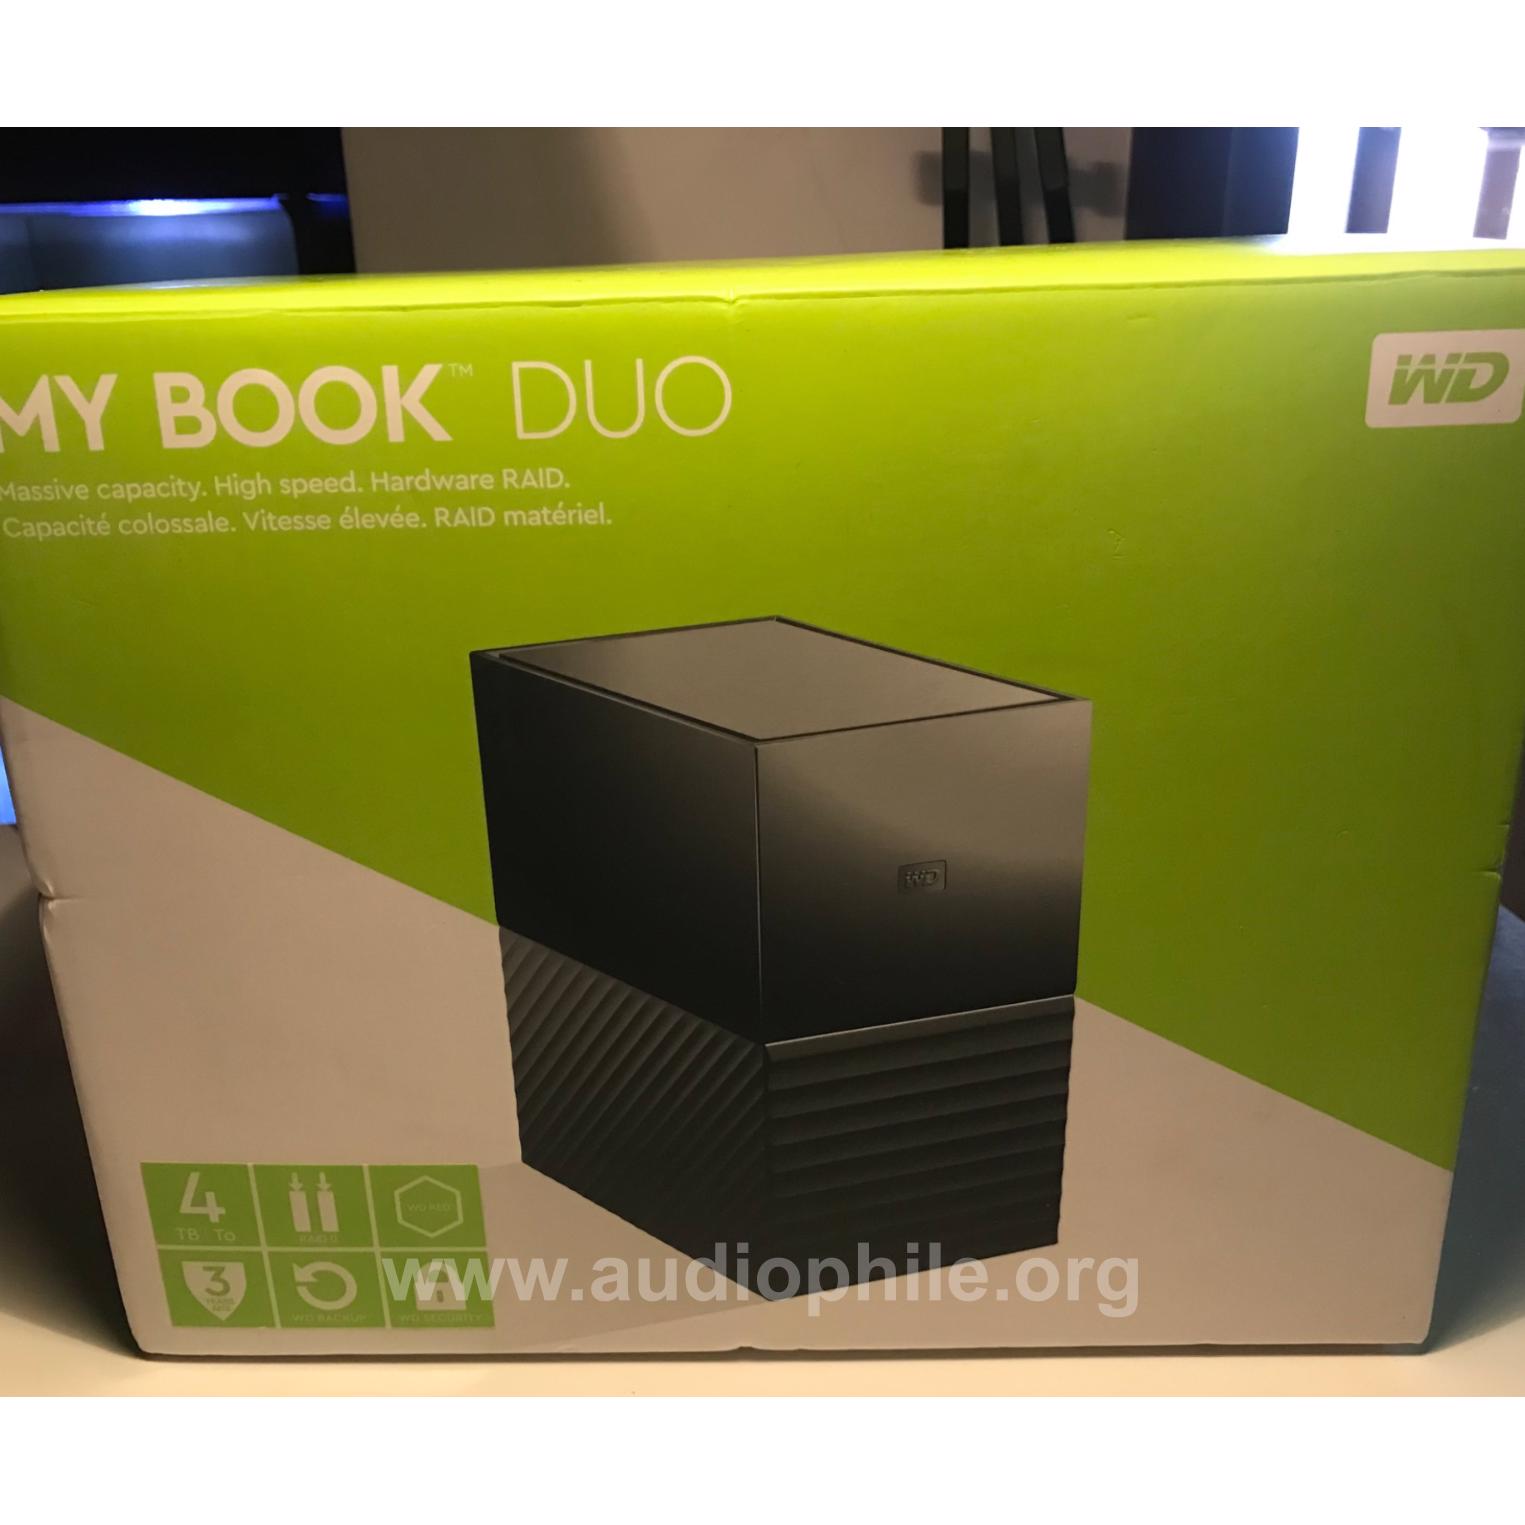 Wd my book duo 4tb 3.5' 64mb